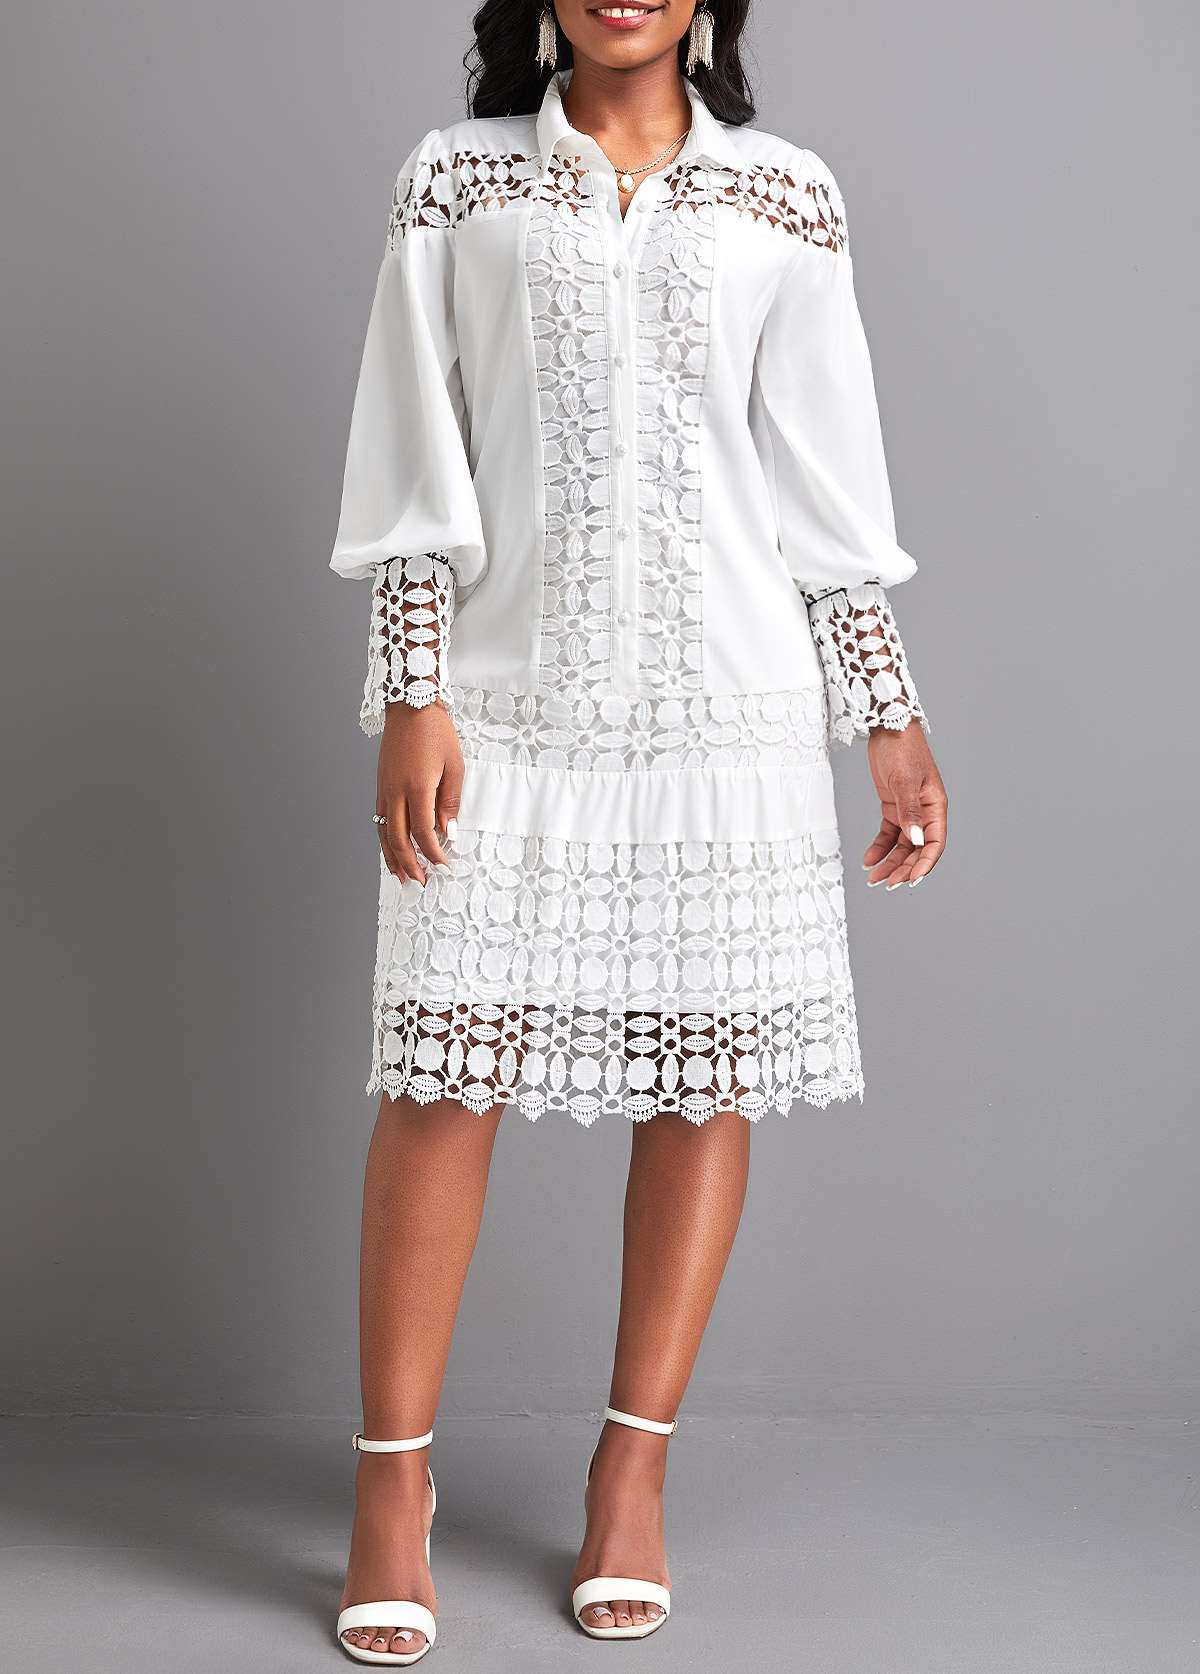 Patchwork White Lace Short Sleeve Dress